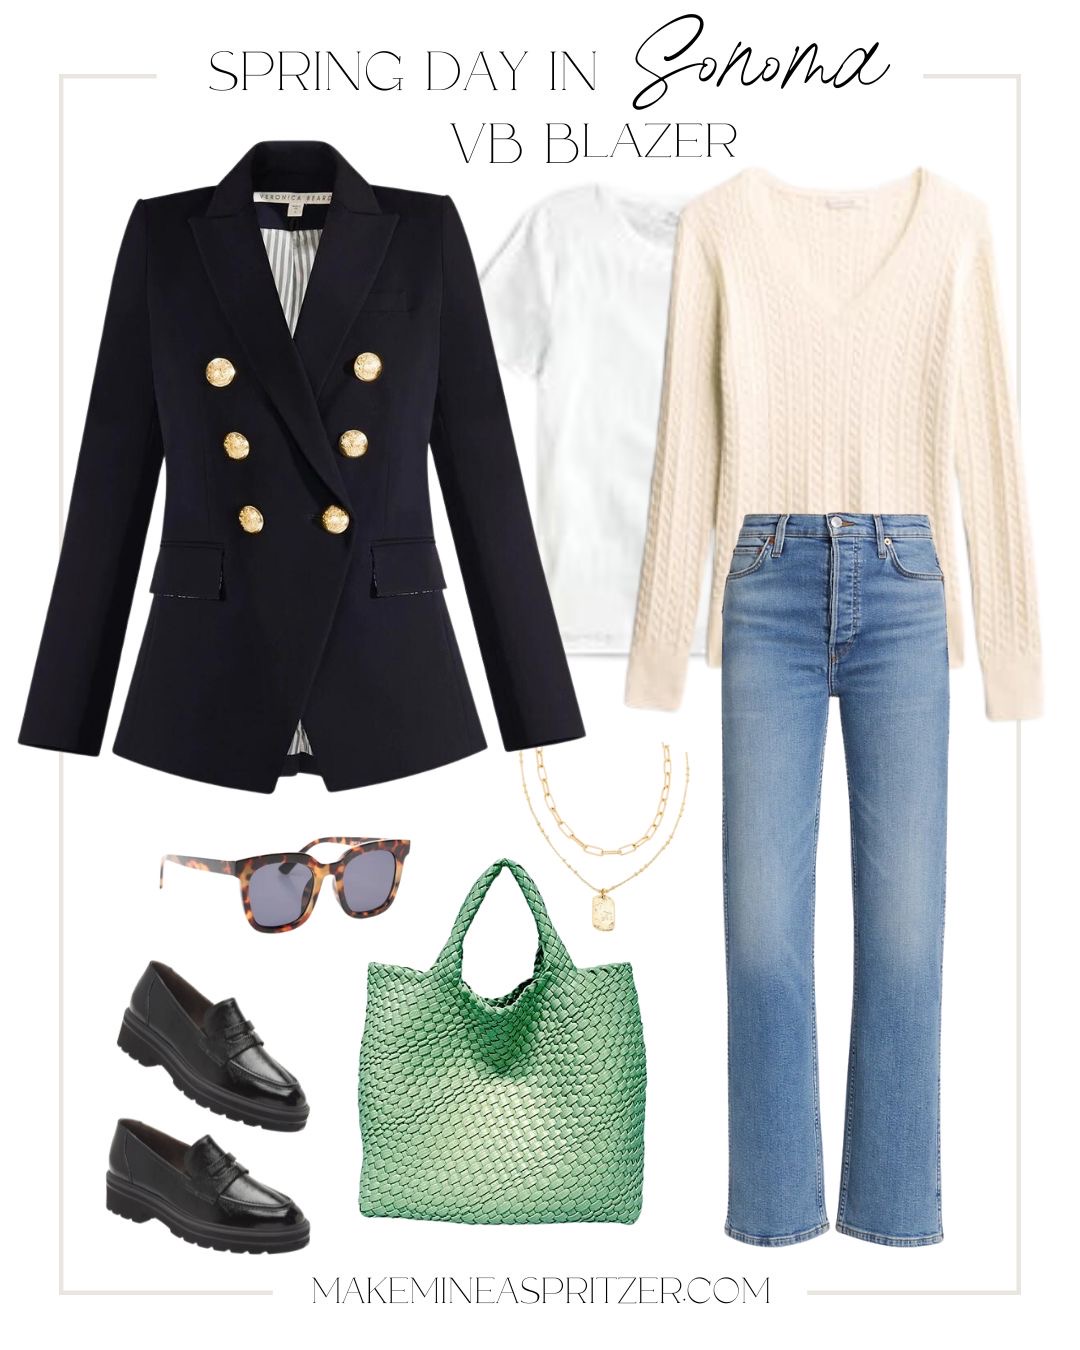 Outfit collage with Veronica Beard blazer.